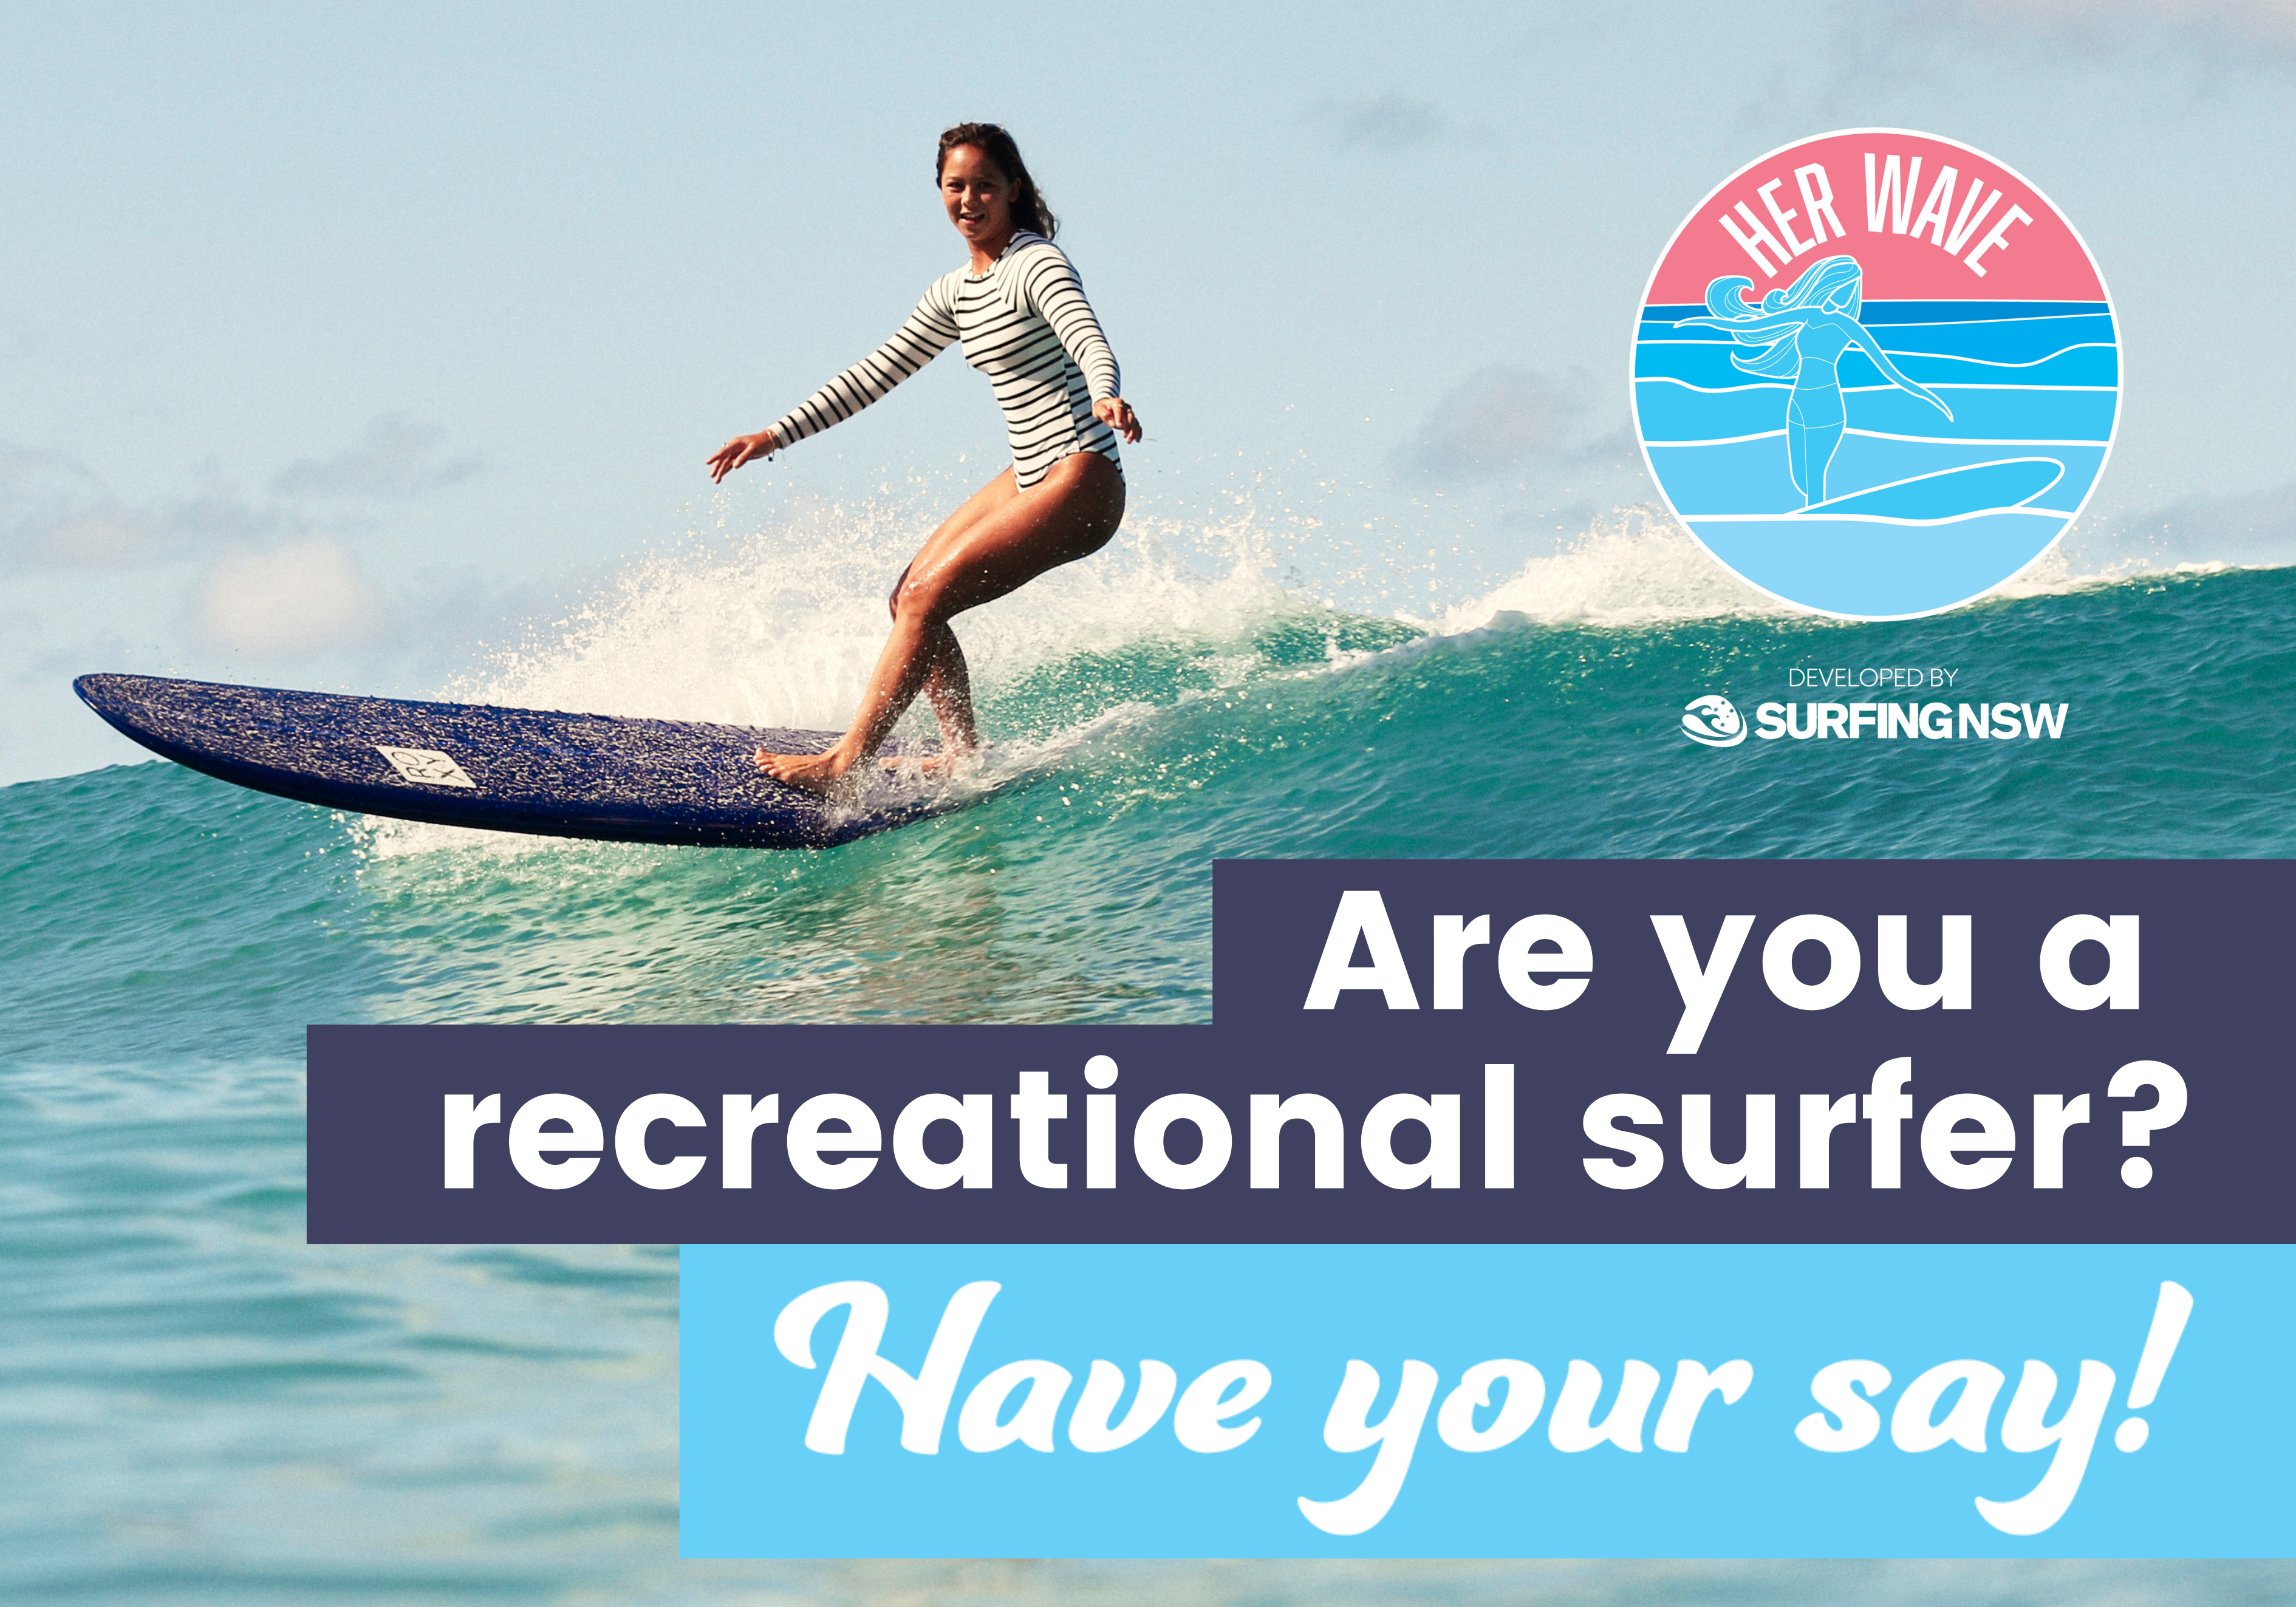 Her Say Recreational Surfers